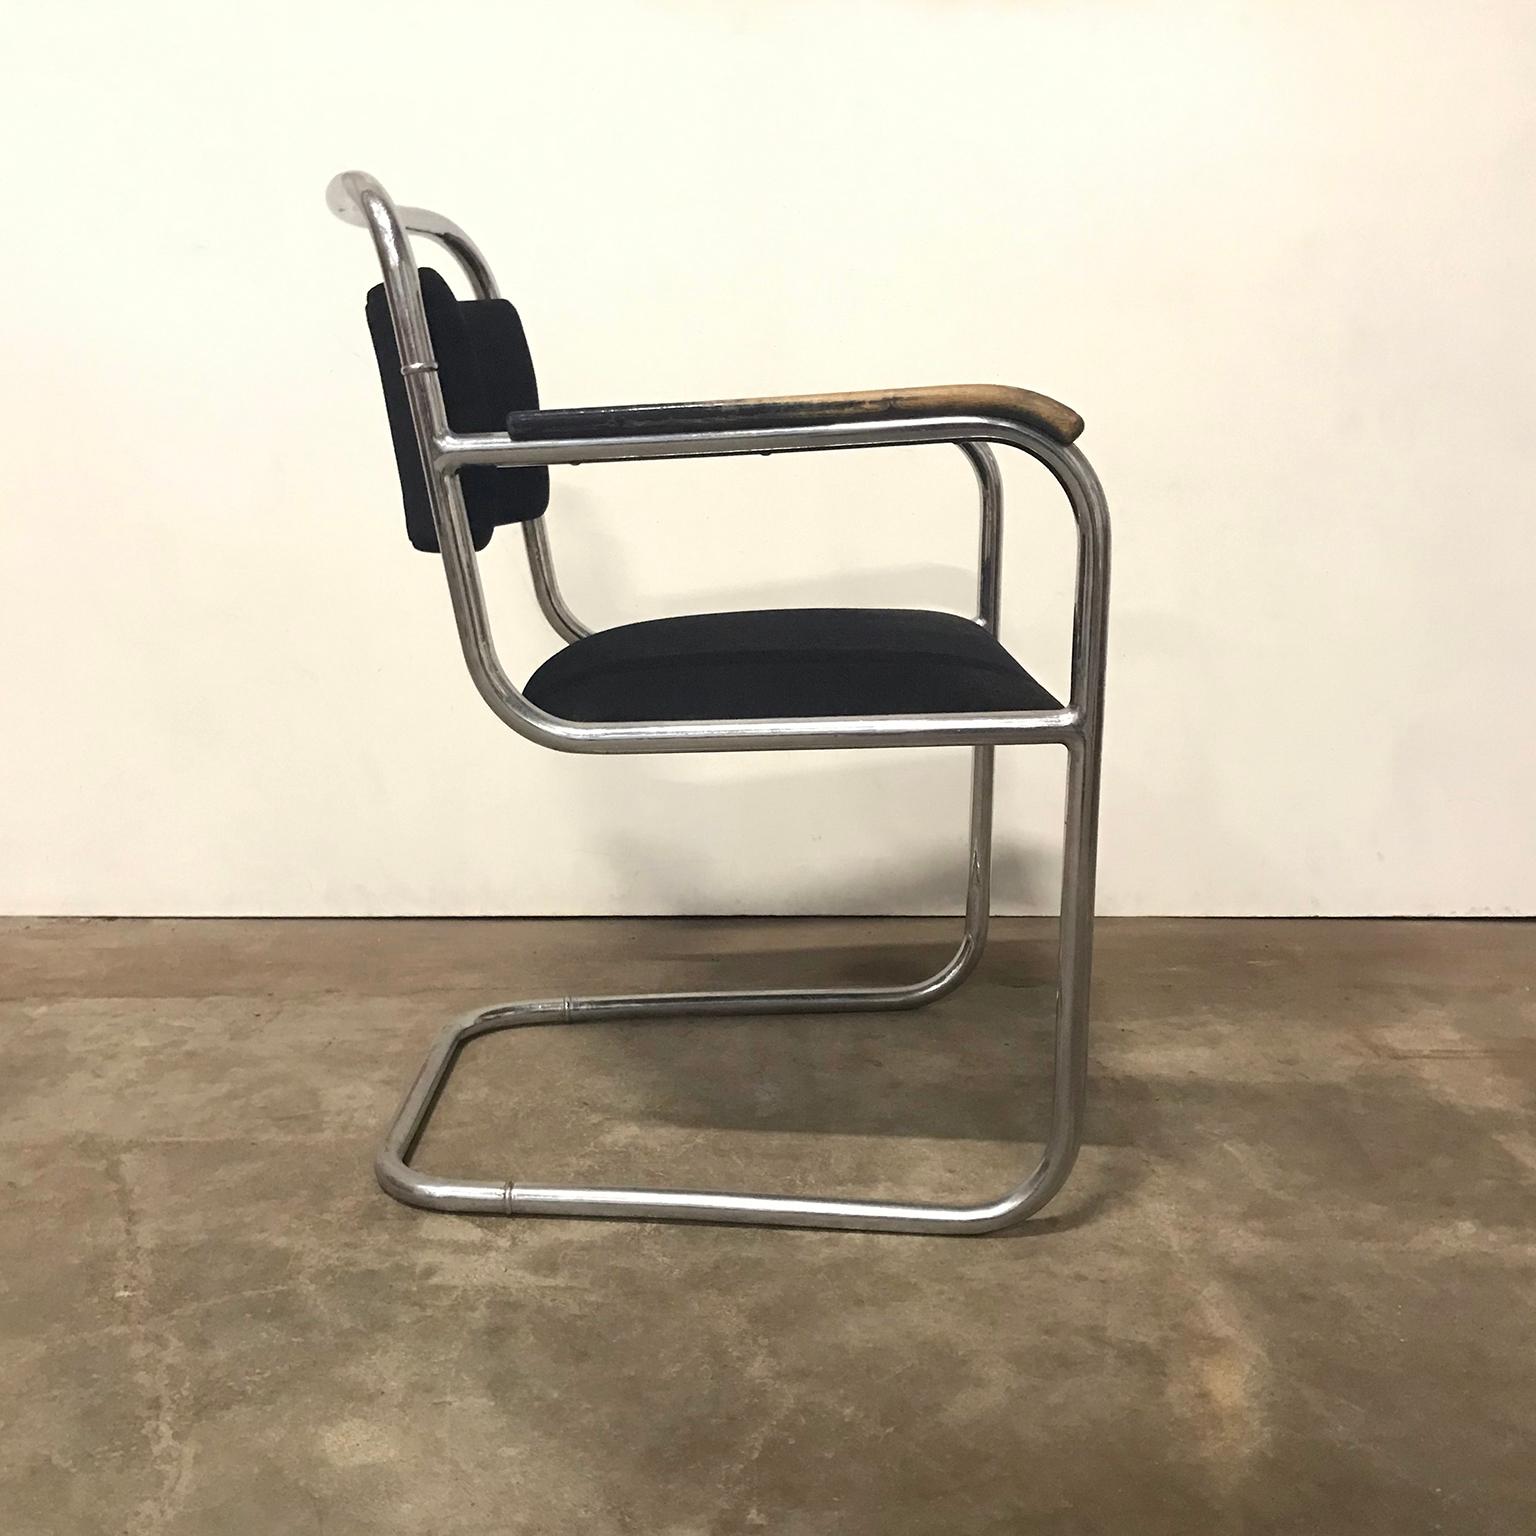 Industrial Dutch Design, Set of Original Tubular Chairs with Black Upholstery, circa 1930 For Sale